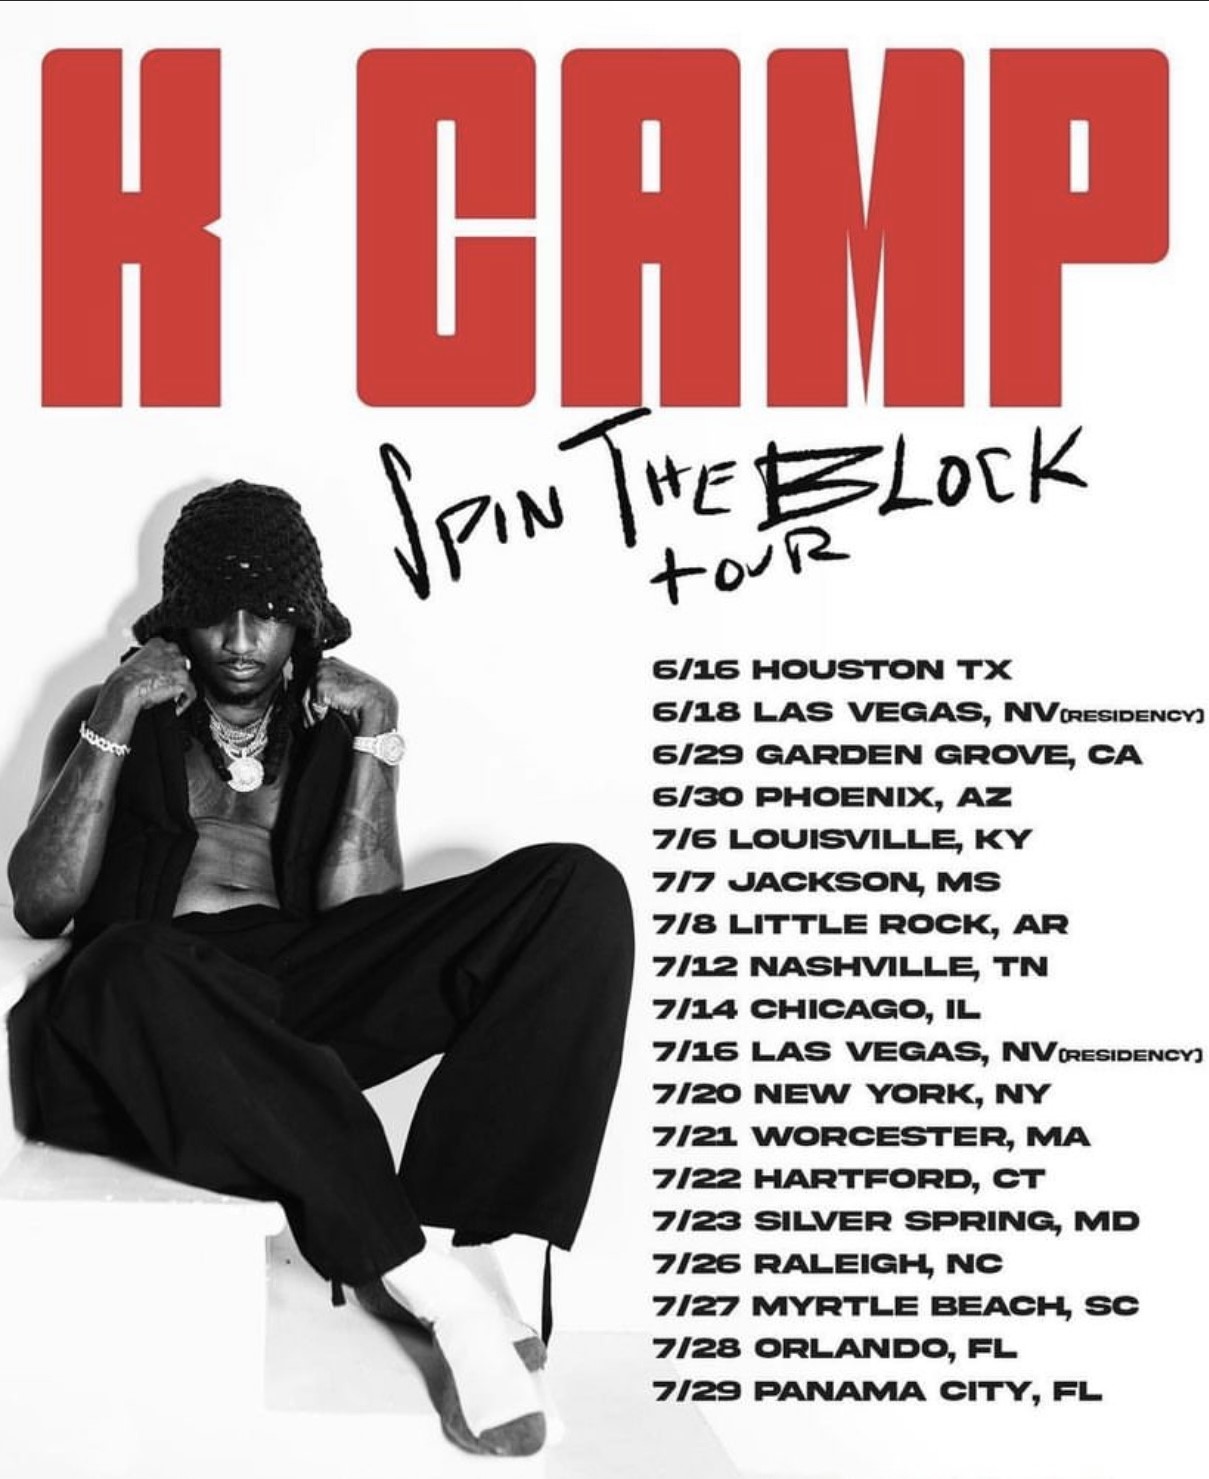 K CAMP SPIN THE BLOCK TOUR on Jul 29, 20:00@LOCATION TO BE ANNOUNCED - Pick a seat, Buy tickets and Get information on TICKETS tickets.bhglabel.com